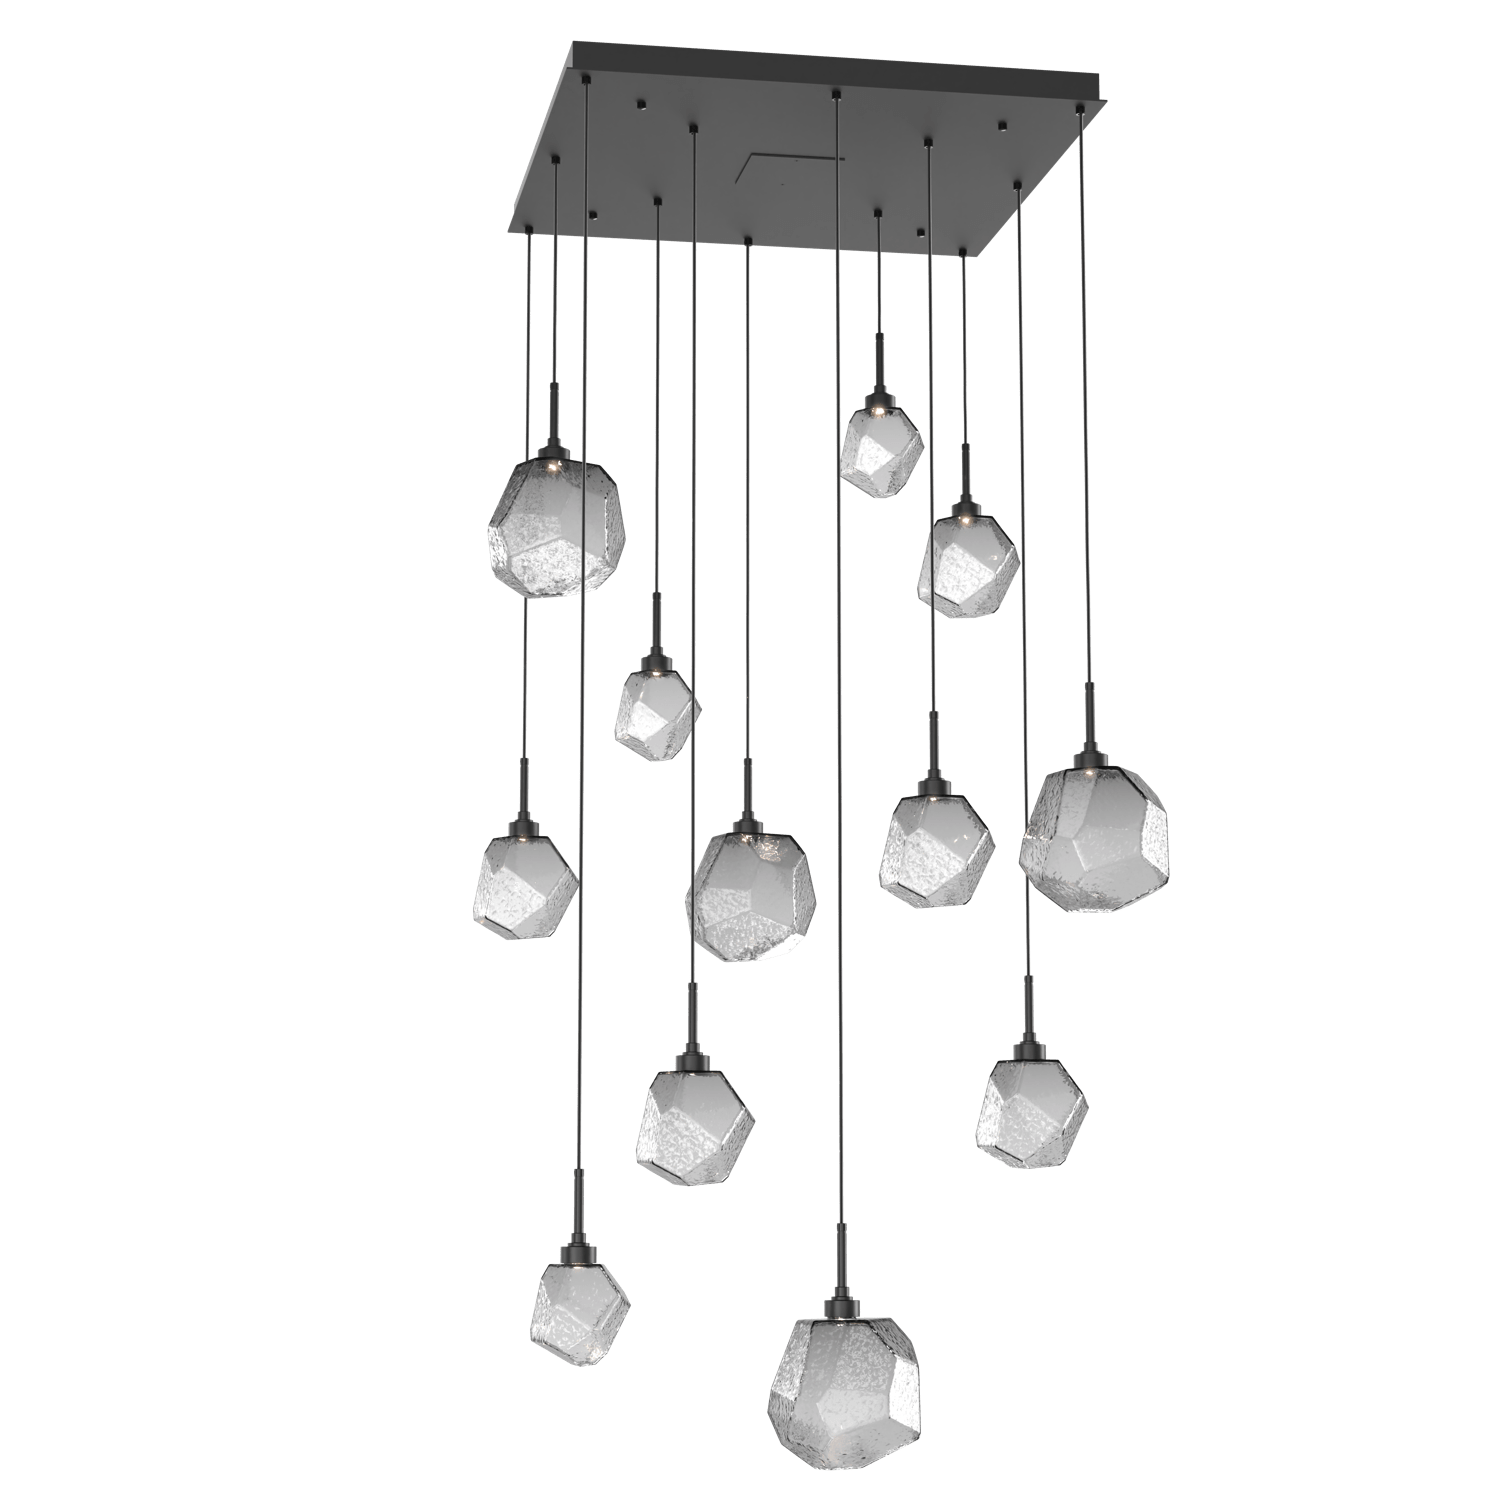 CHB0039-12-MB-S-Hammerton-Studio-Gem-12-light-square-pendant-chandelier-with-matte-black-finish-and-smoke-blown-glass-shades-and-LED-lamping